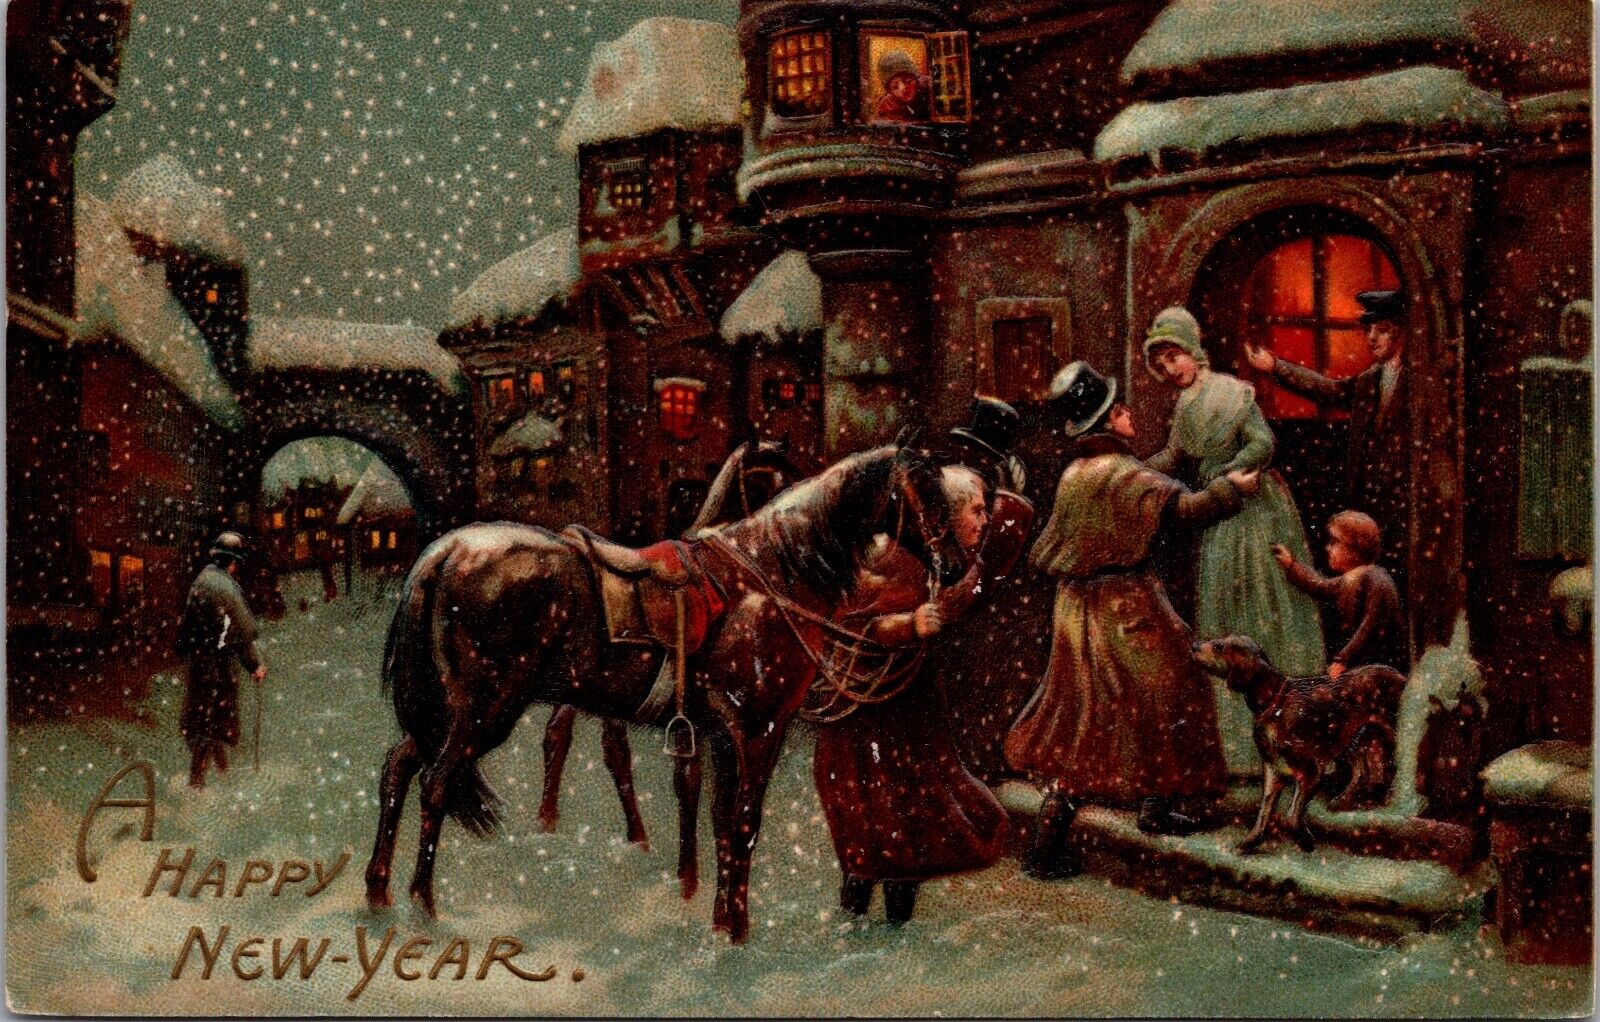 A Happy New Year Postcard Men Arriving Home Via Horseback in the Snow